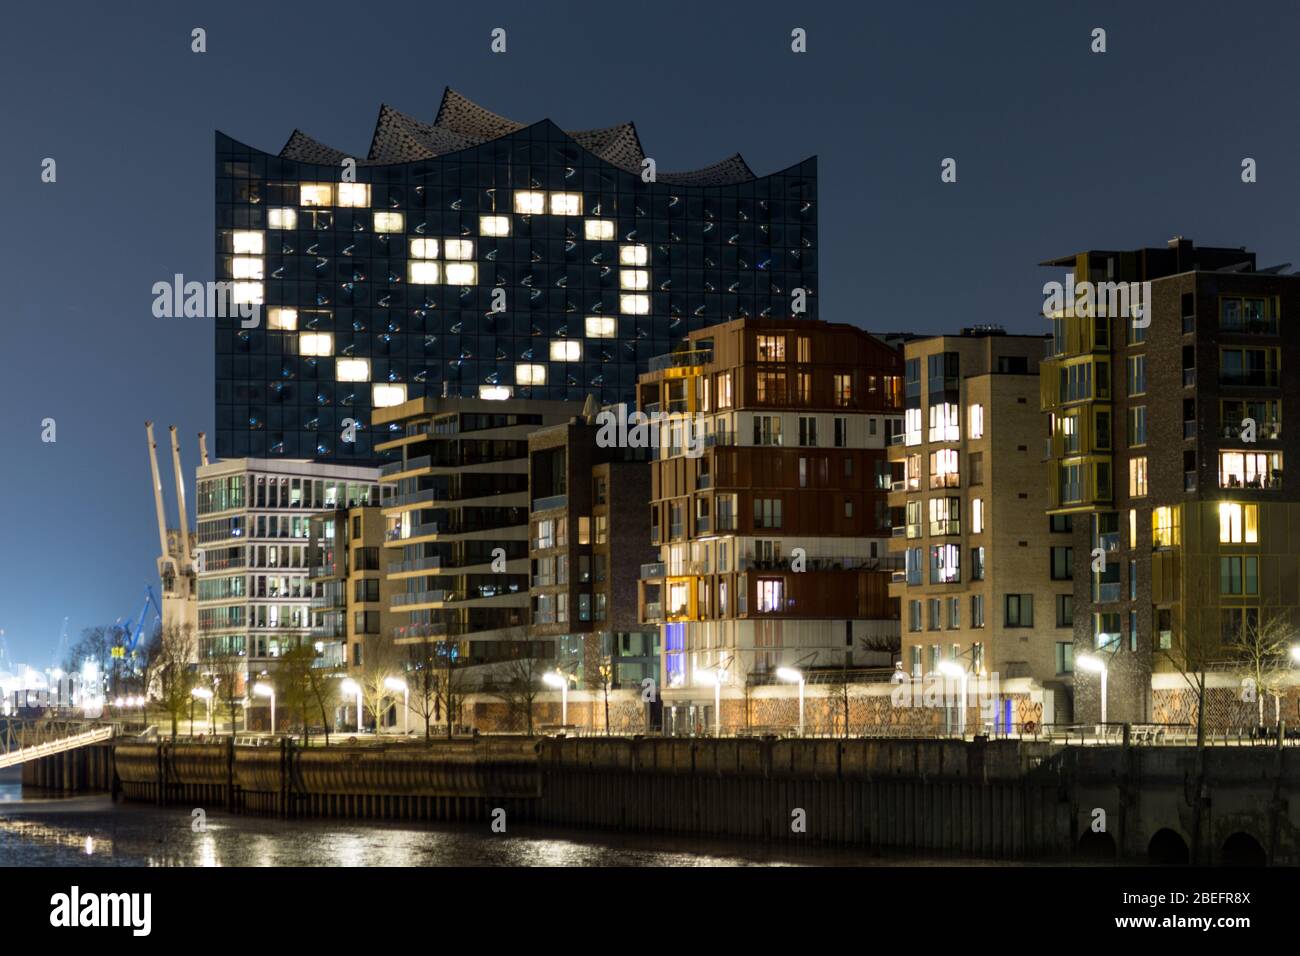 The shape of a heart is formed by the lights of the Westin Hotel inside the Elbphilharmonie concert hall in Hamburg, Germany, Stock Photo